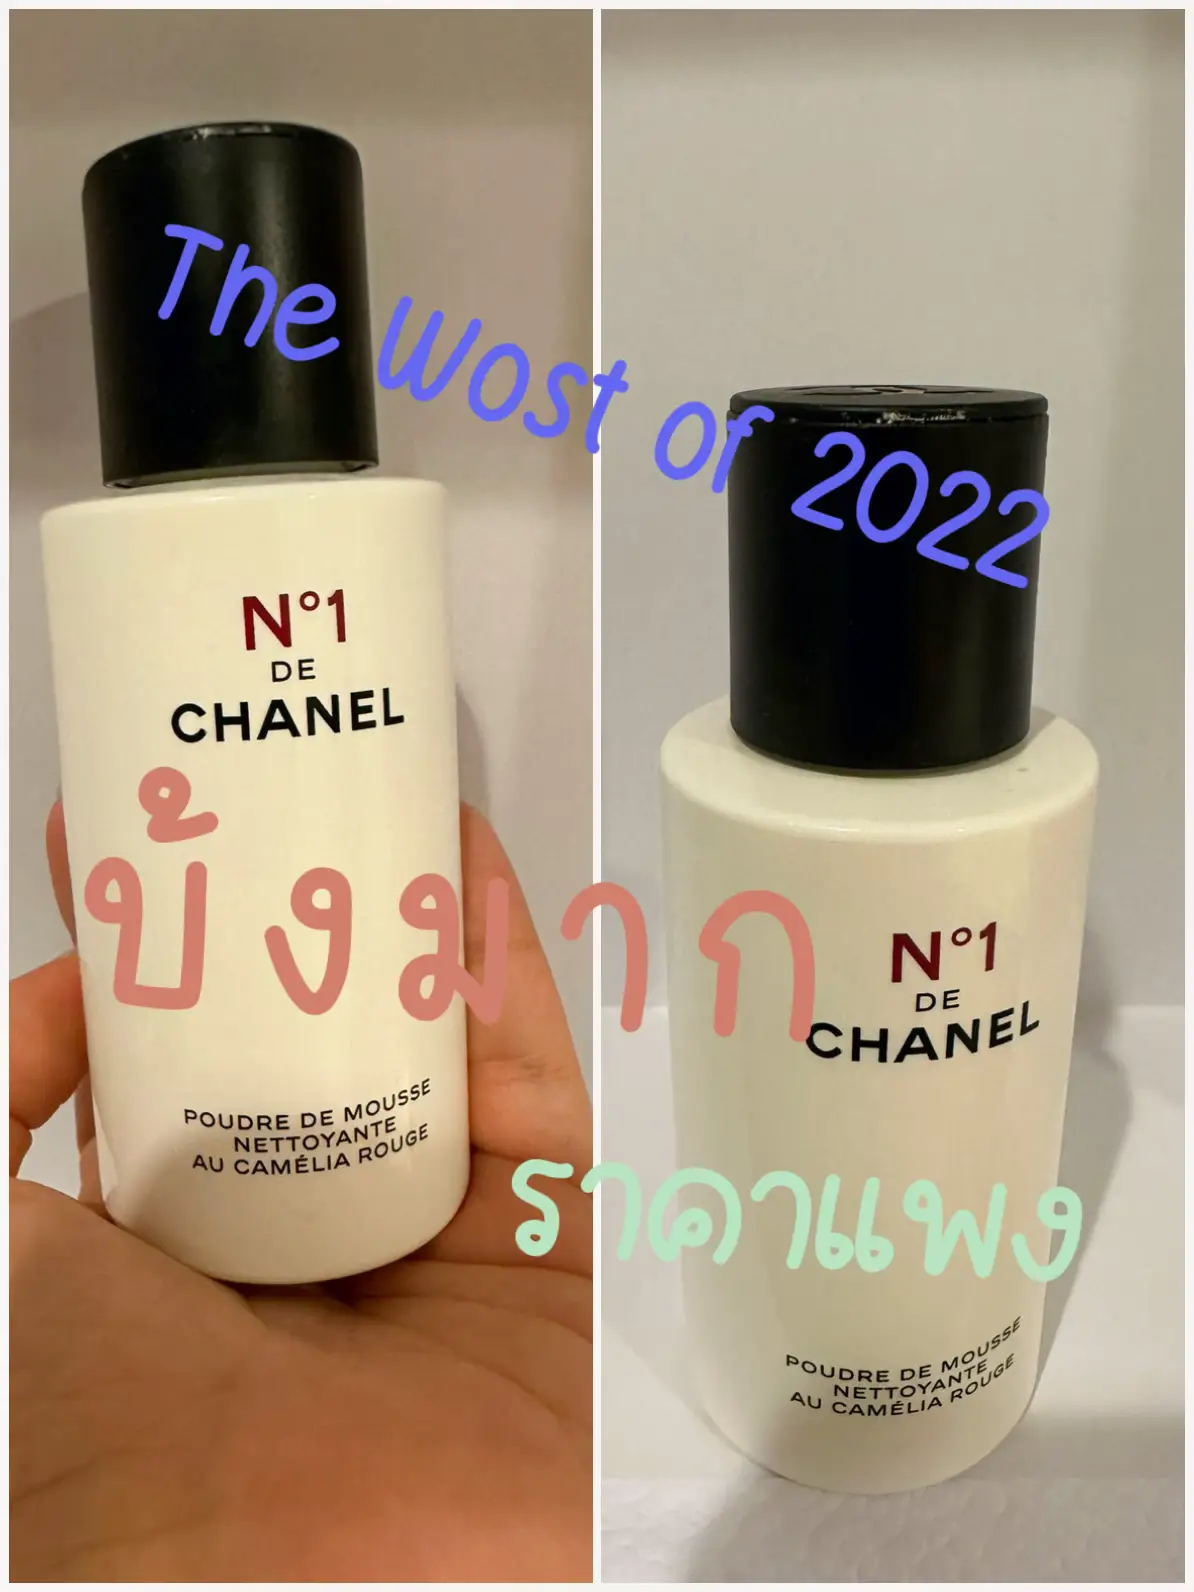 The worst beauty 2022 Chanel Powder to foam, Gallery posted by Lazy review